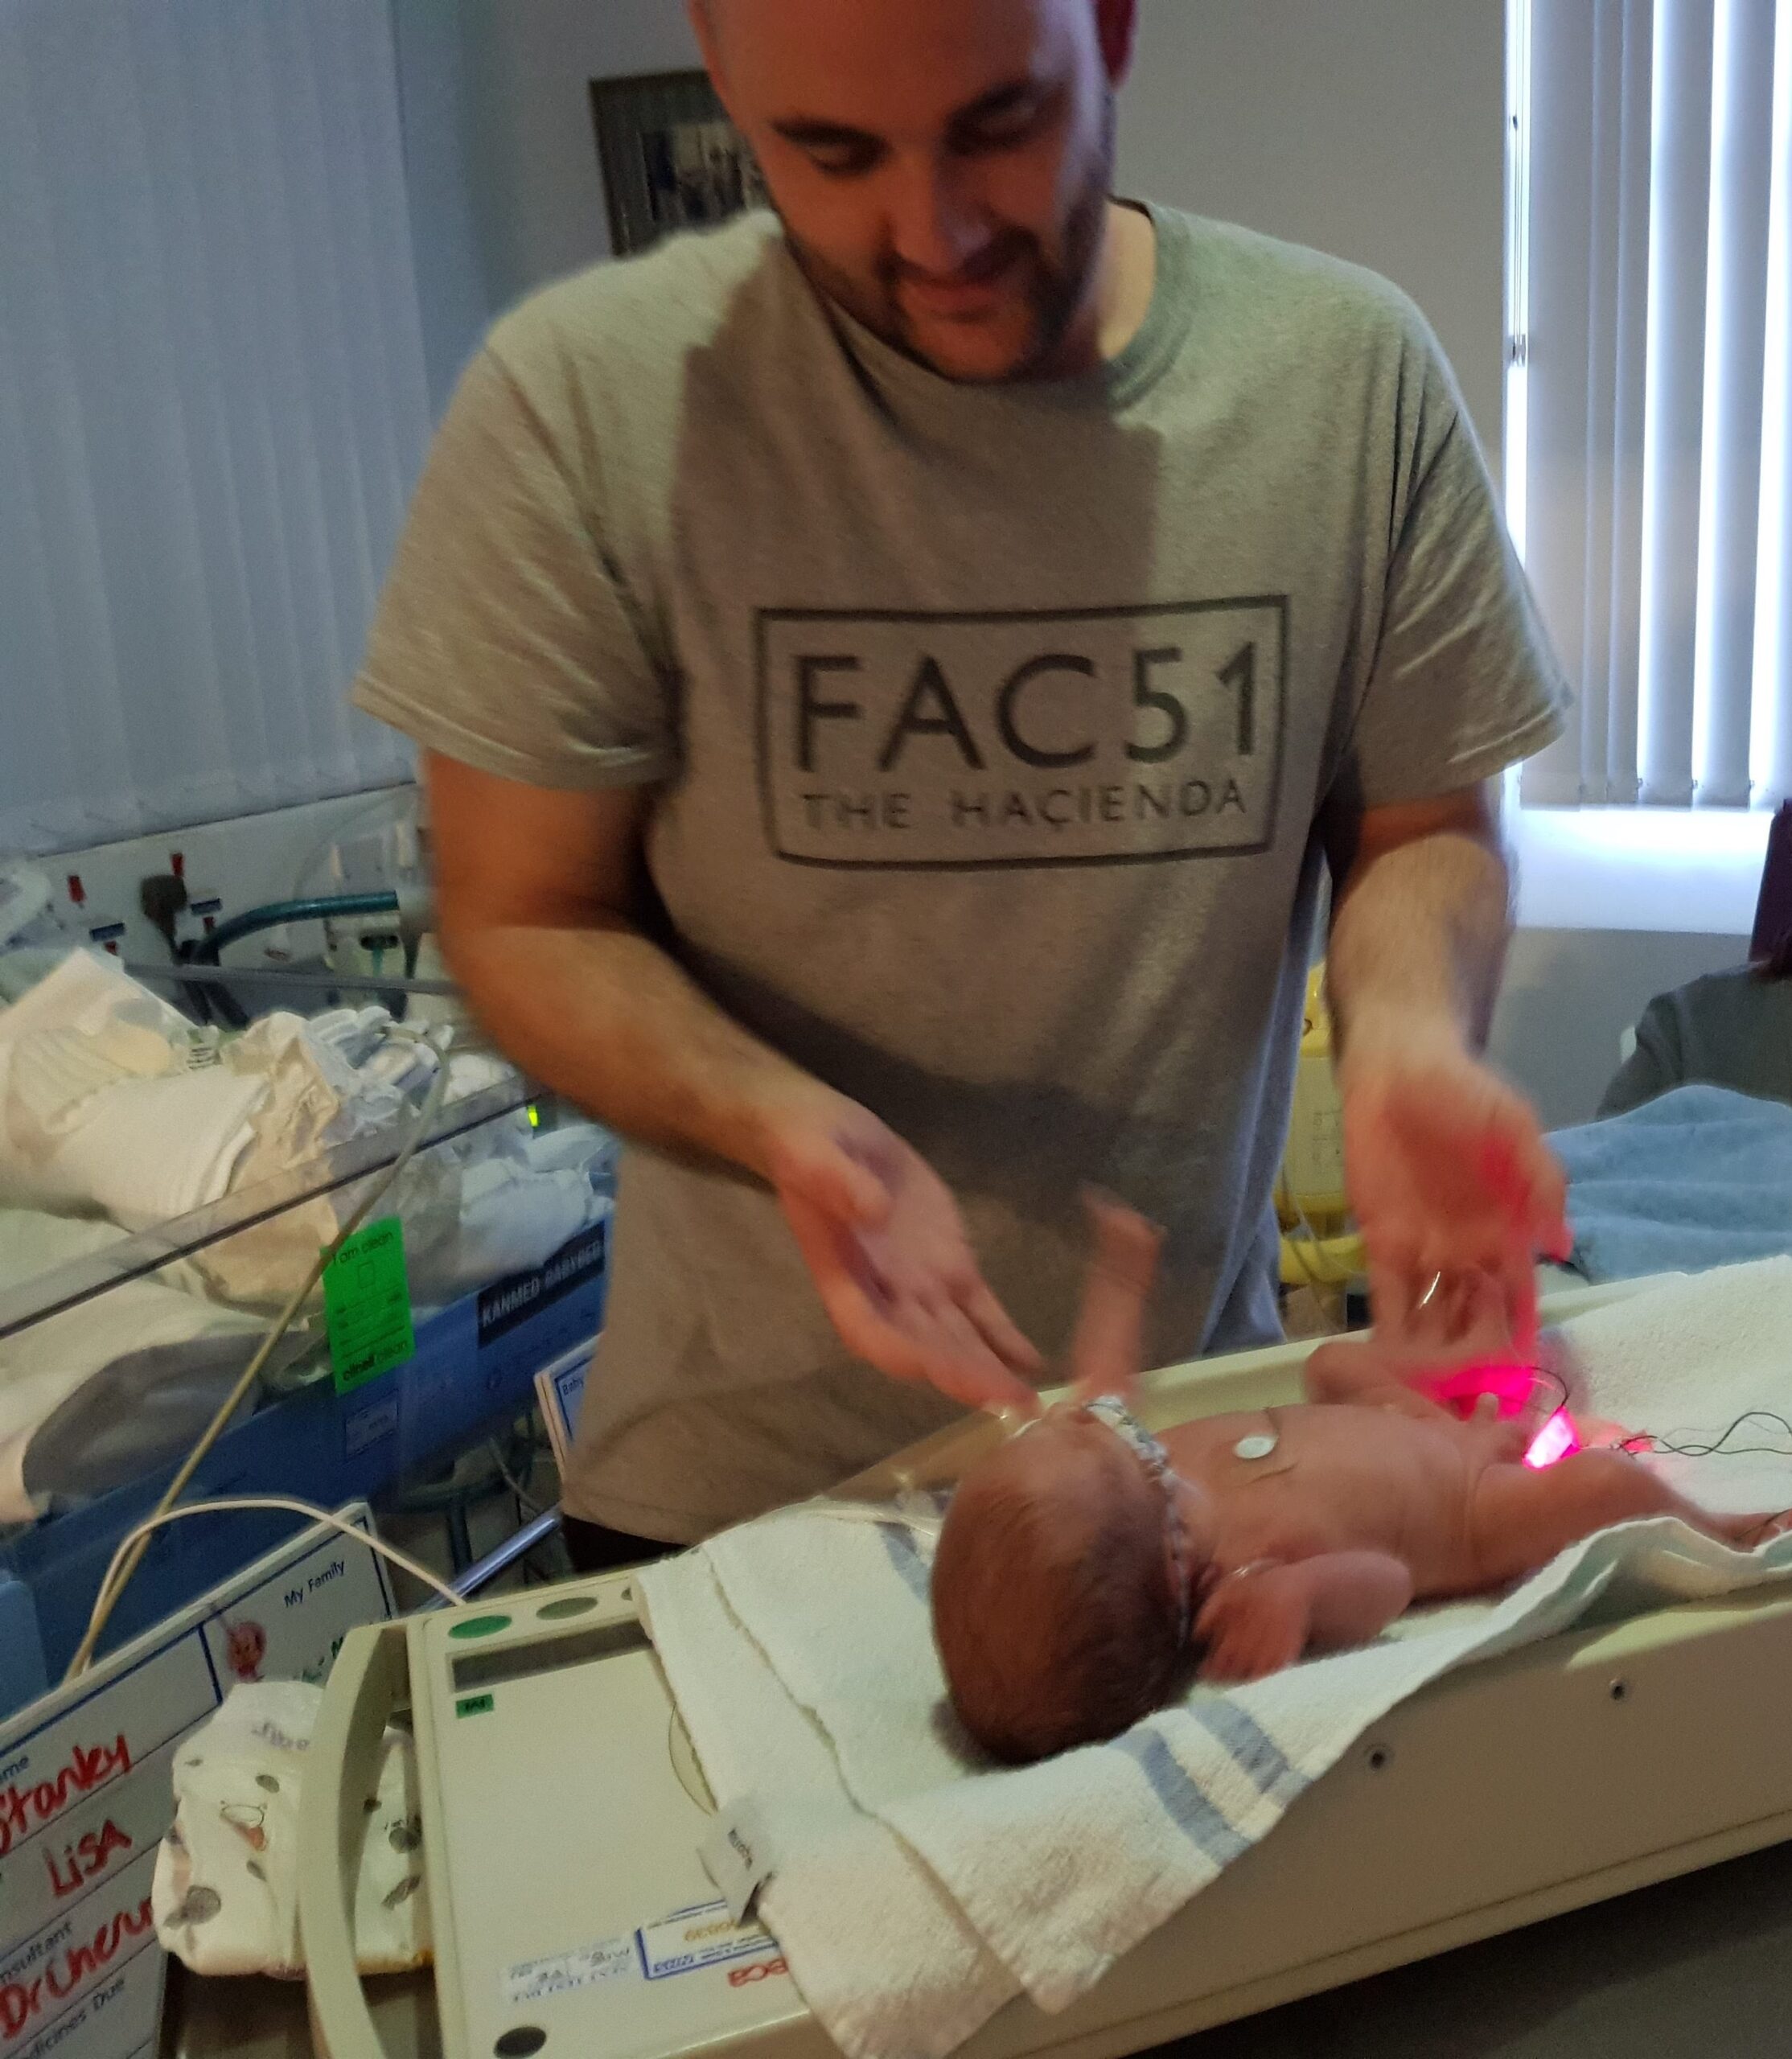 NICU Awareness Month: helpful resources for parents